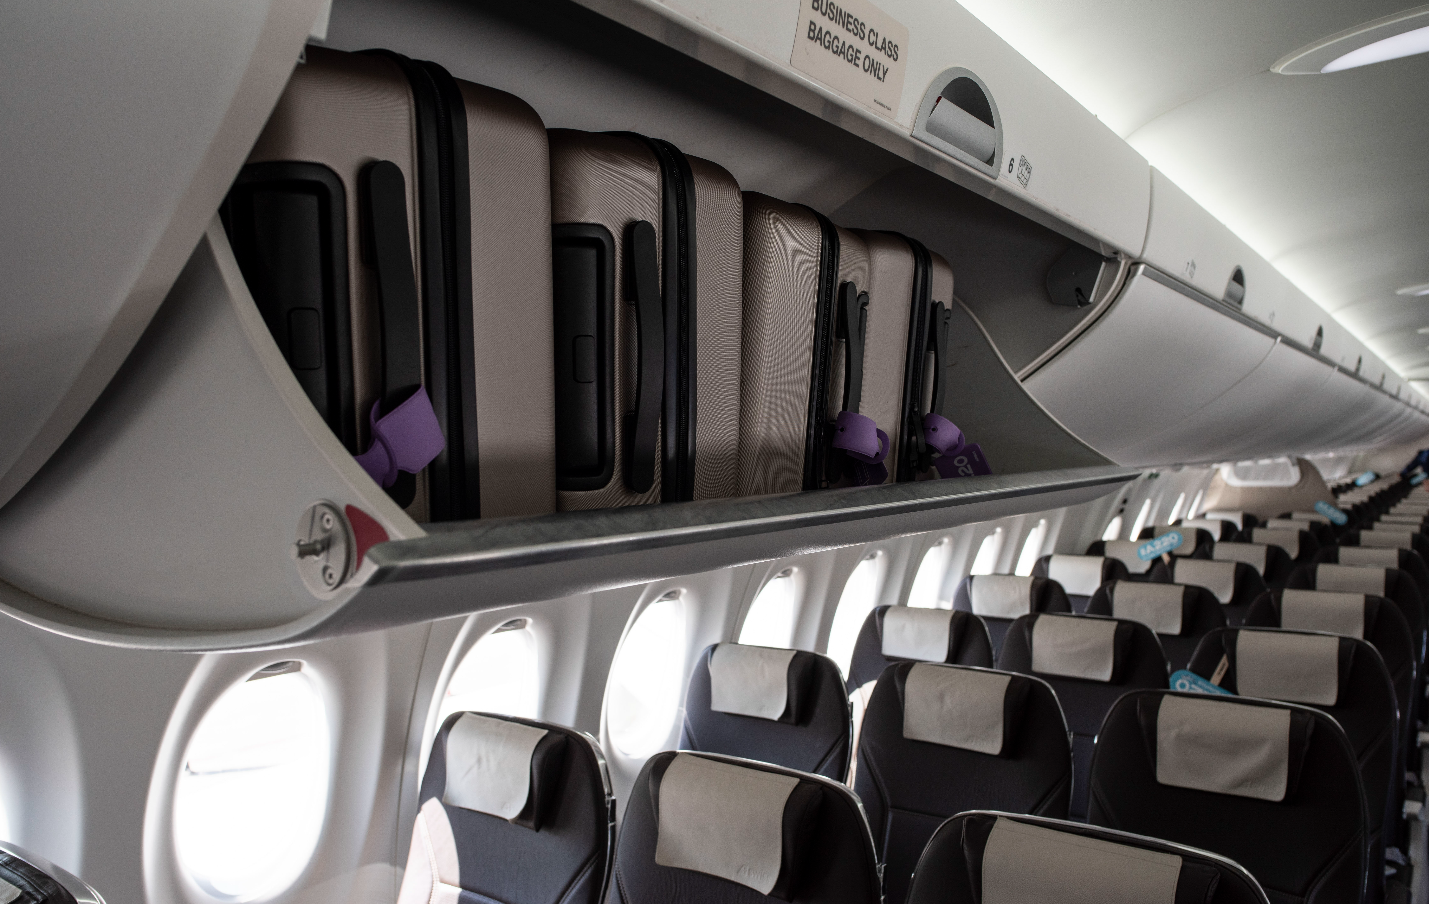 Inside the Airbus A220 cabin with storage bins open.